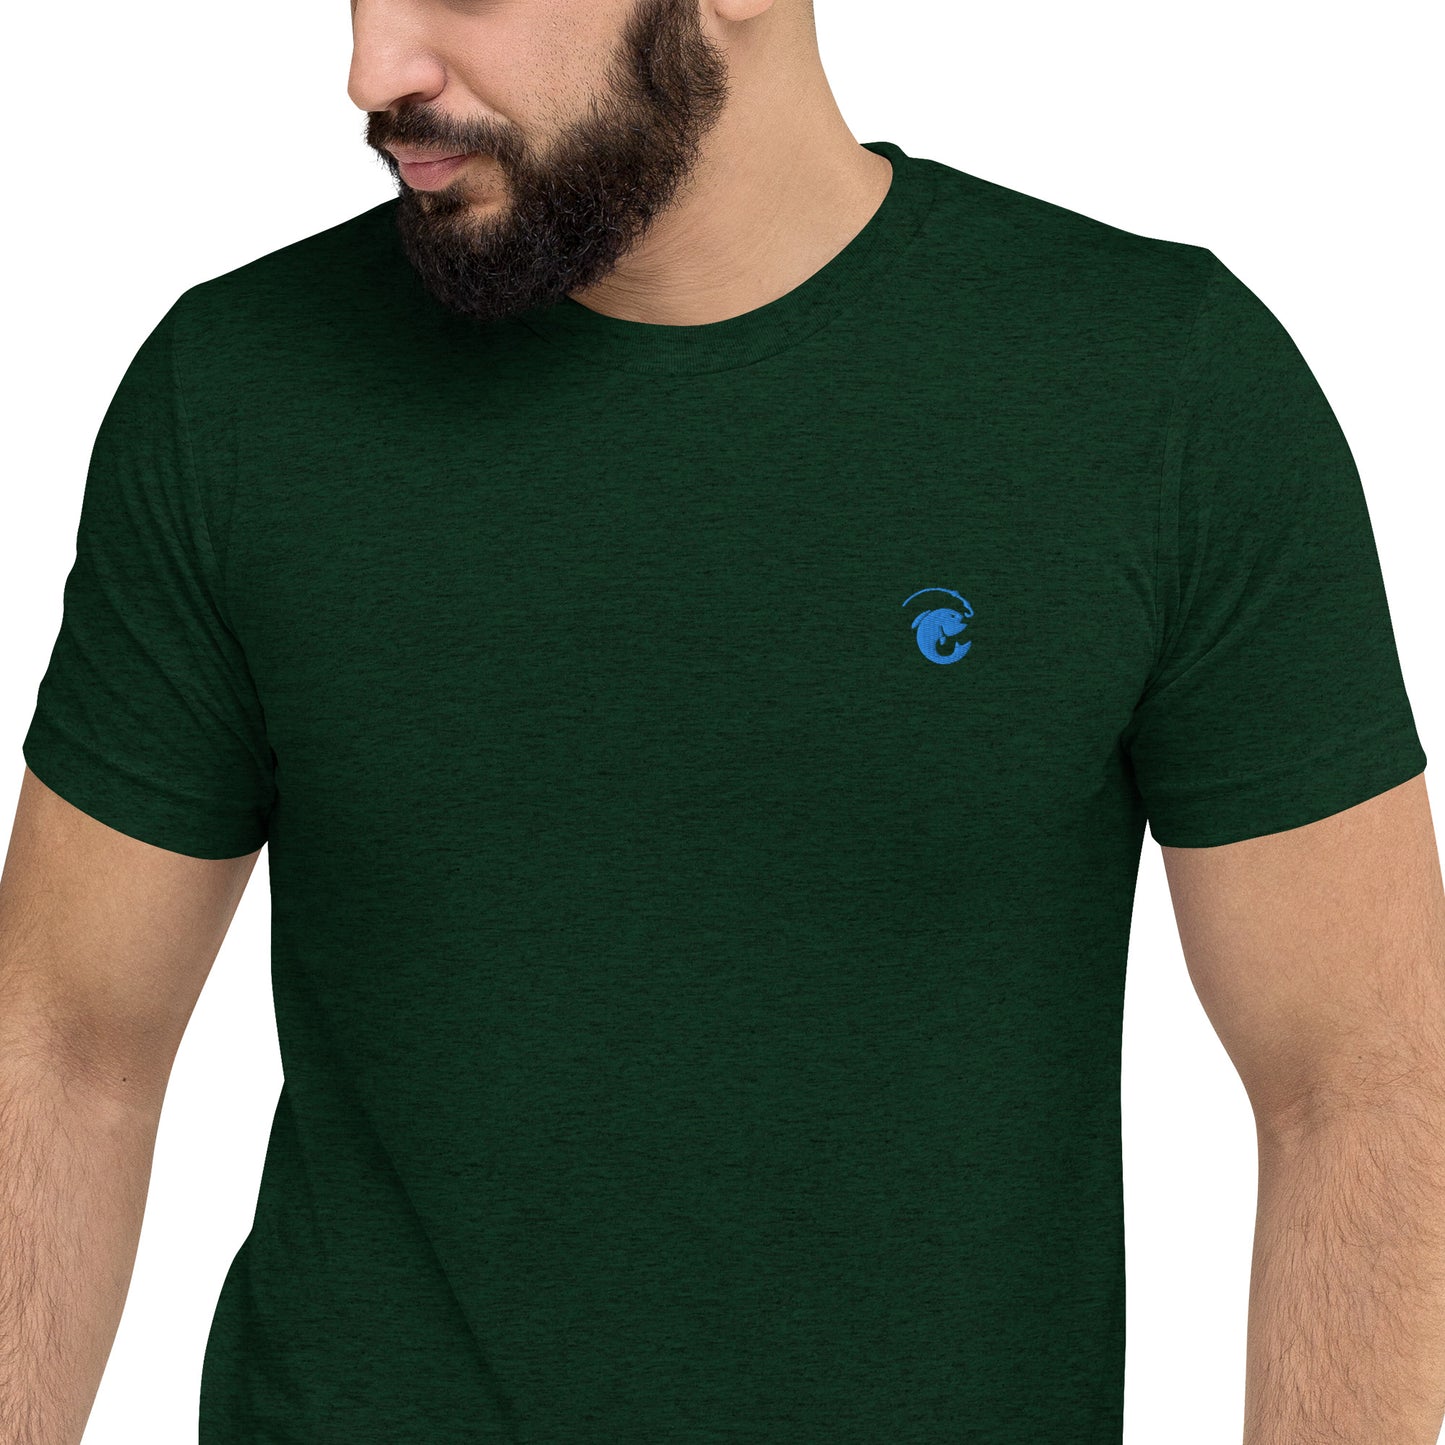 Fitted Durable Vintage T-Shirt - Aqua